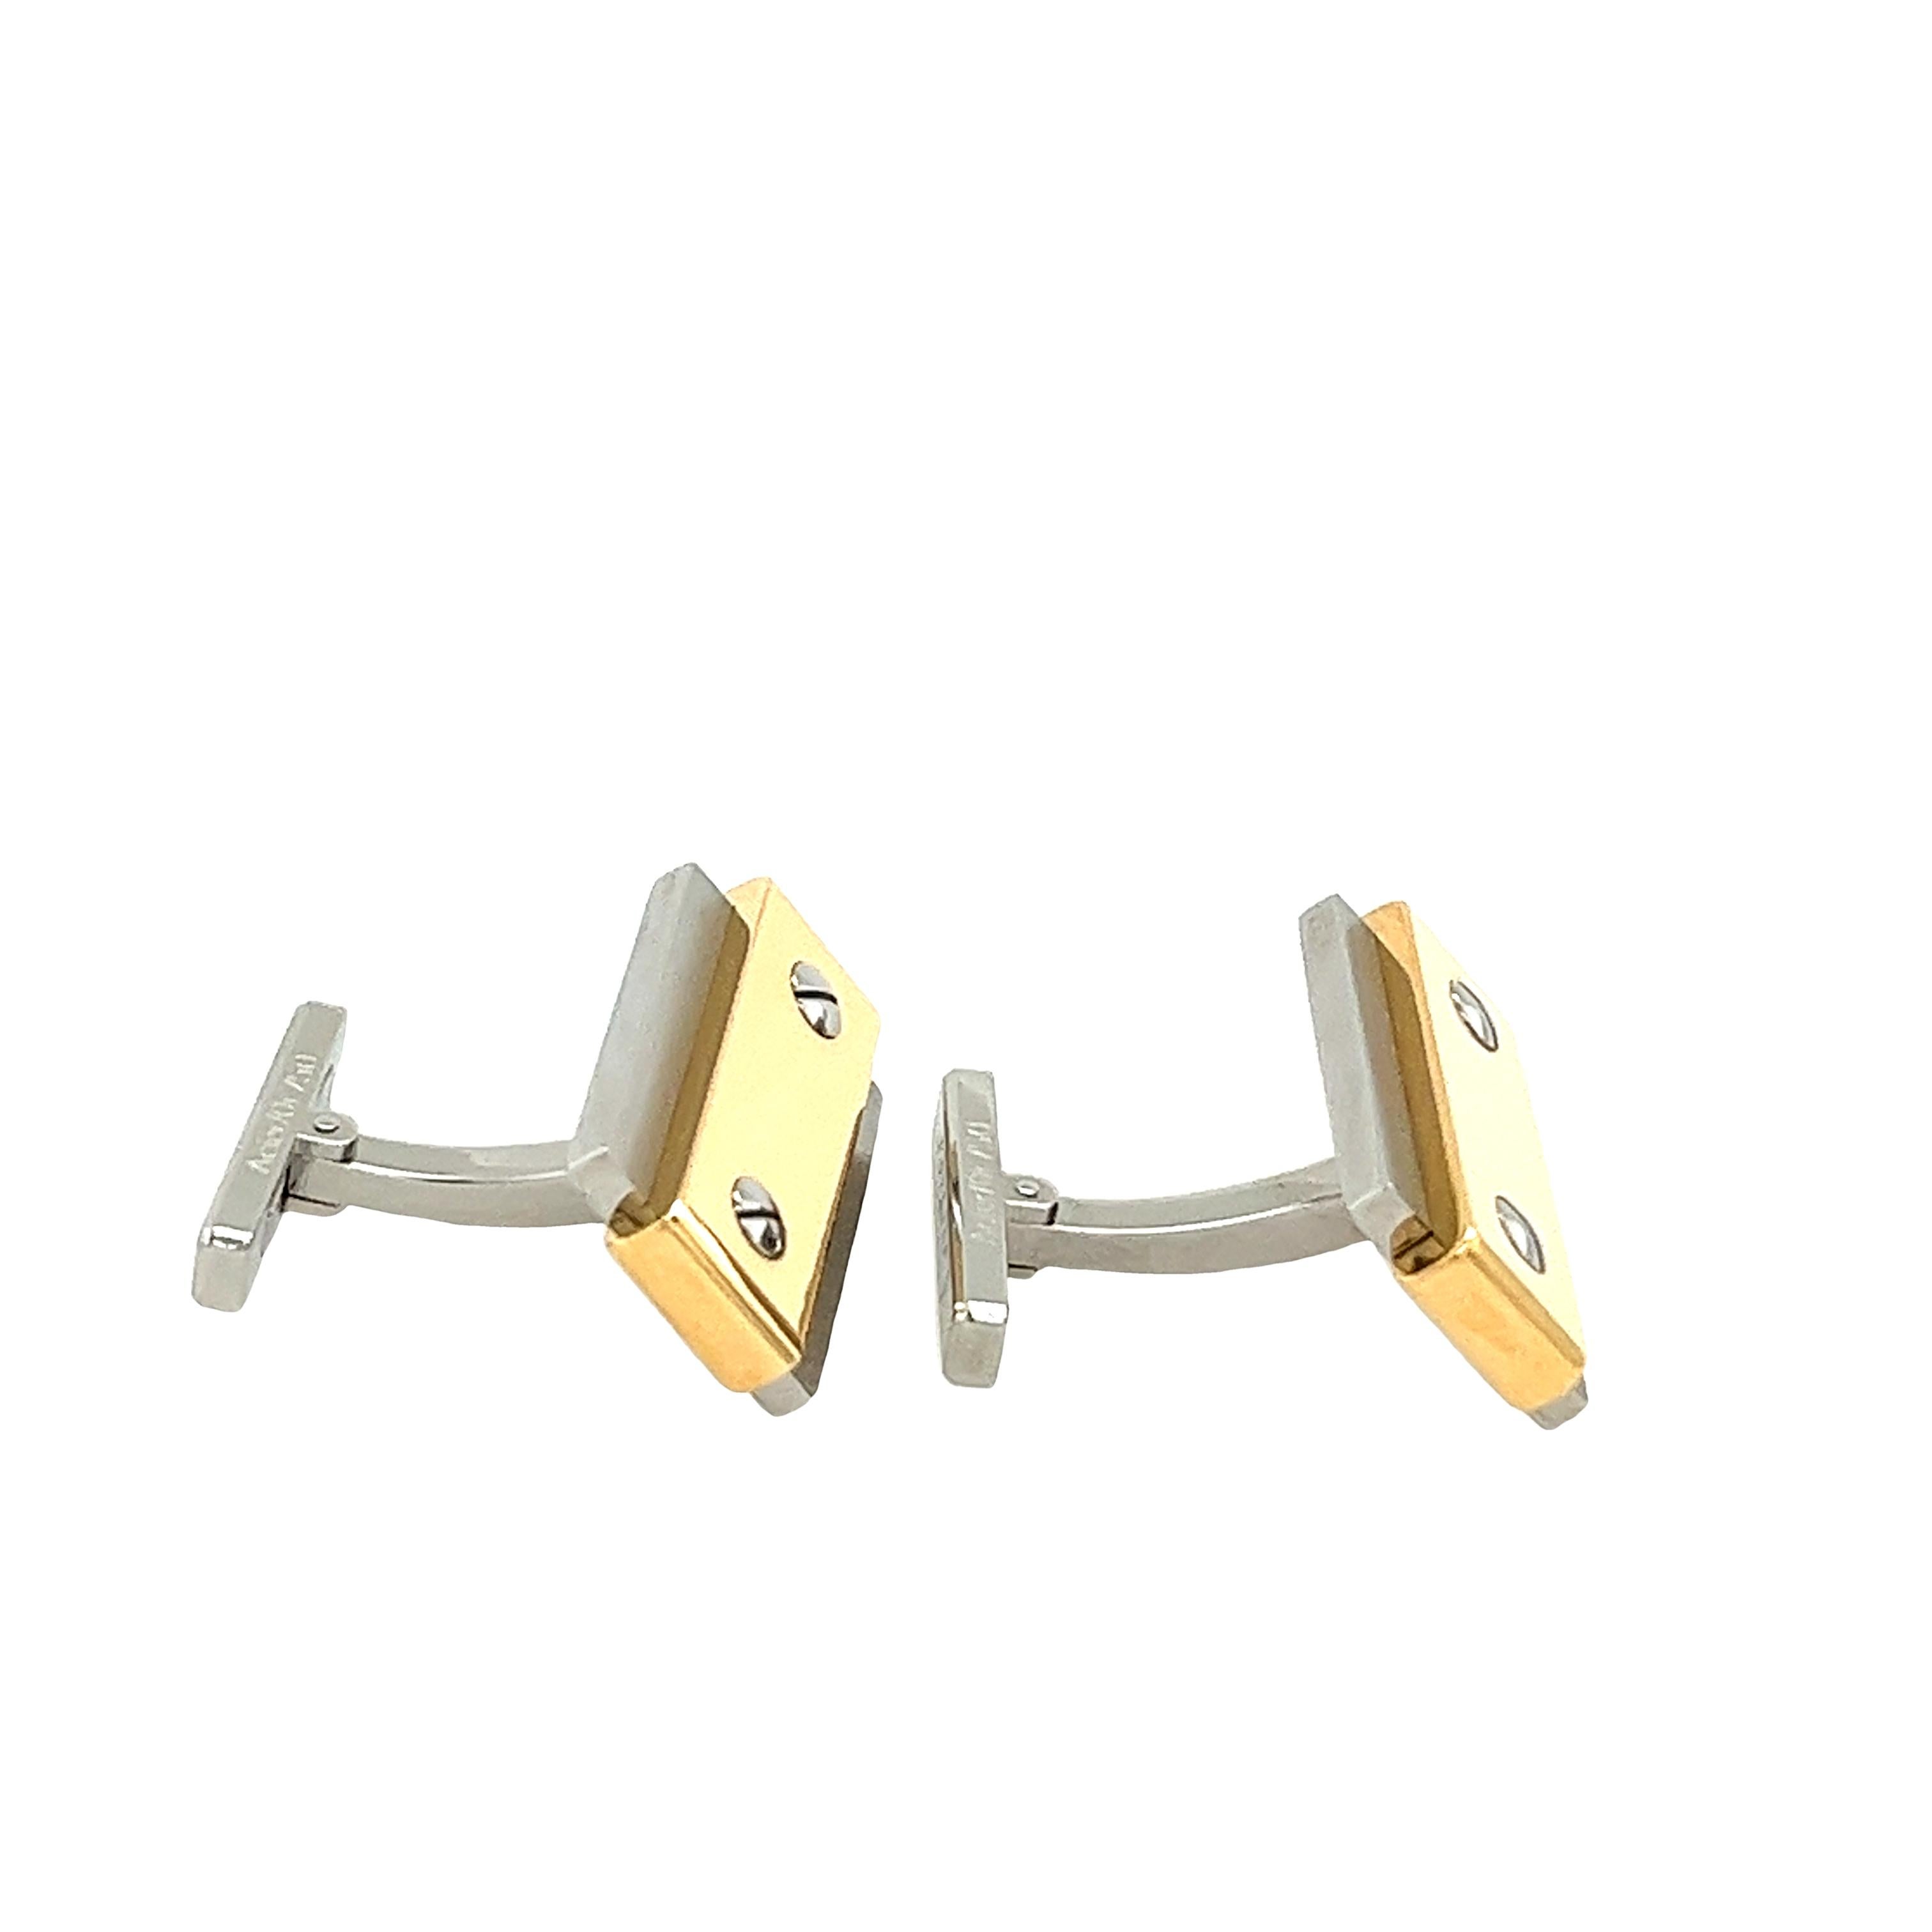 Add a touch of luxury to your ensemble with the Cartier Santos 18ct Gold & Stainless Steel Acier Cufflinks. These iconic cufflinks blend the warmth of 18ct gold with the durability of stainless steel, exuding sophistication and style. With their